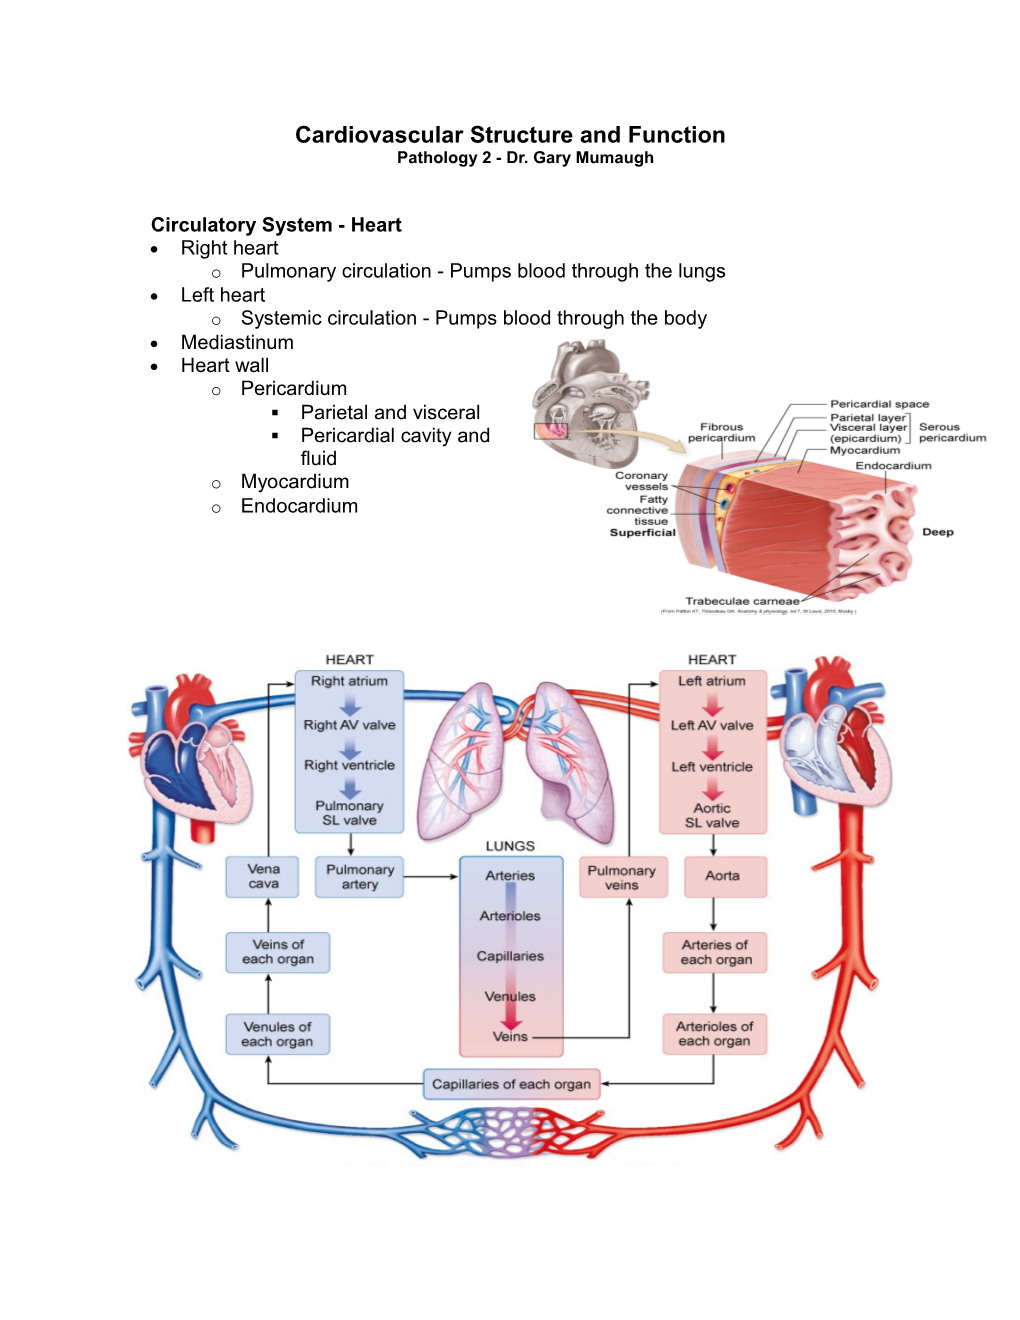 Cardiovascular Structure and Function